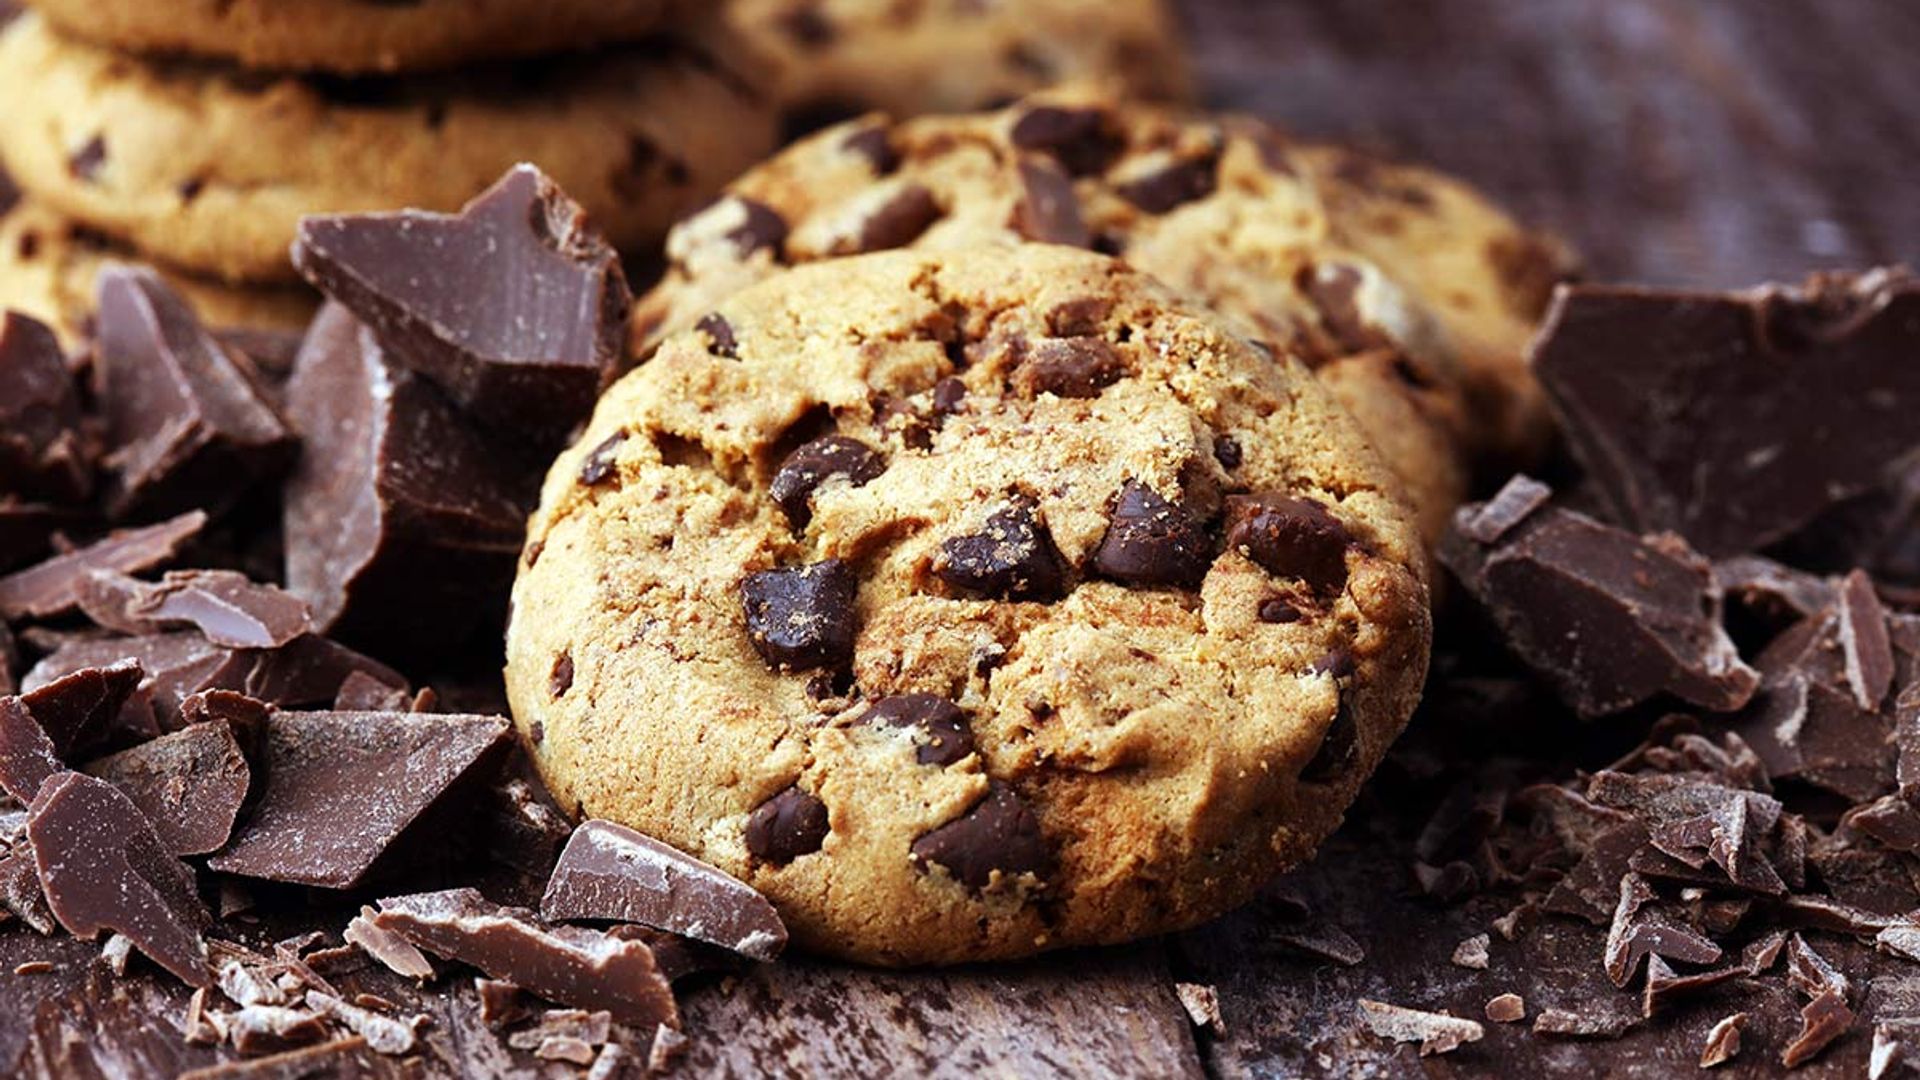 How to bake posh chocolate chip cookies to make lockdown a whole lot better